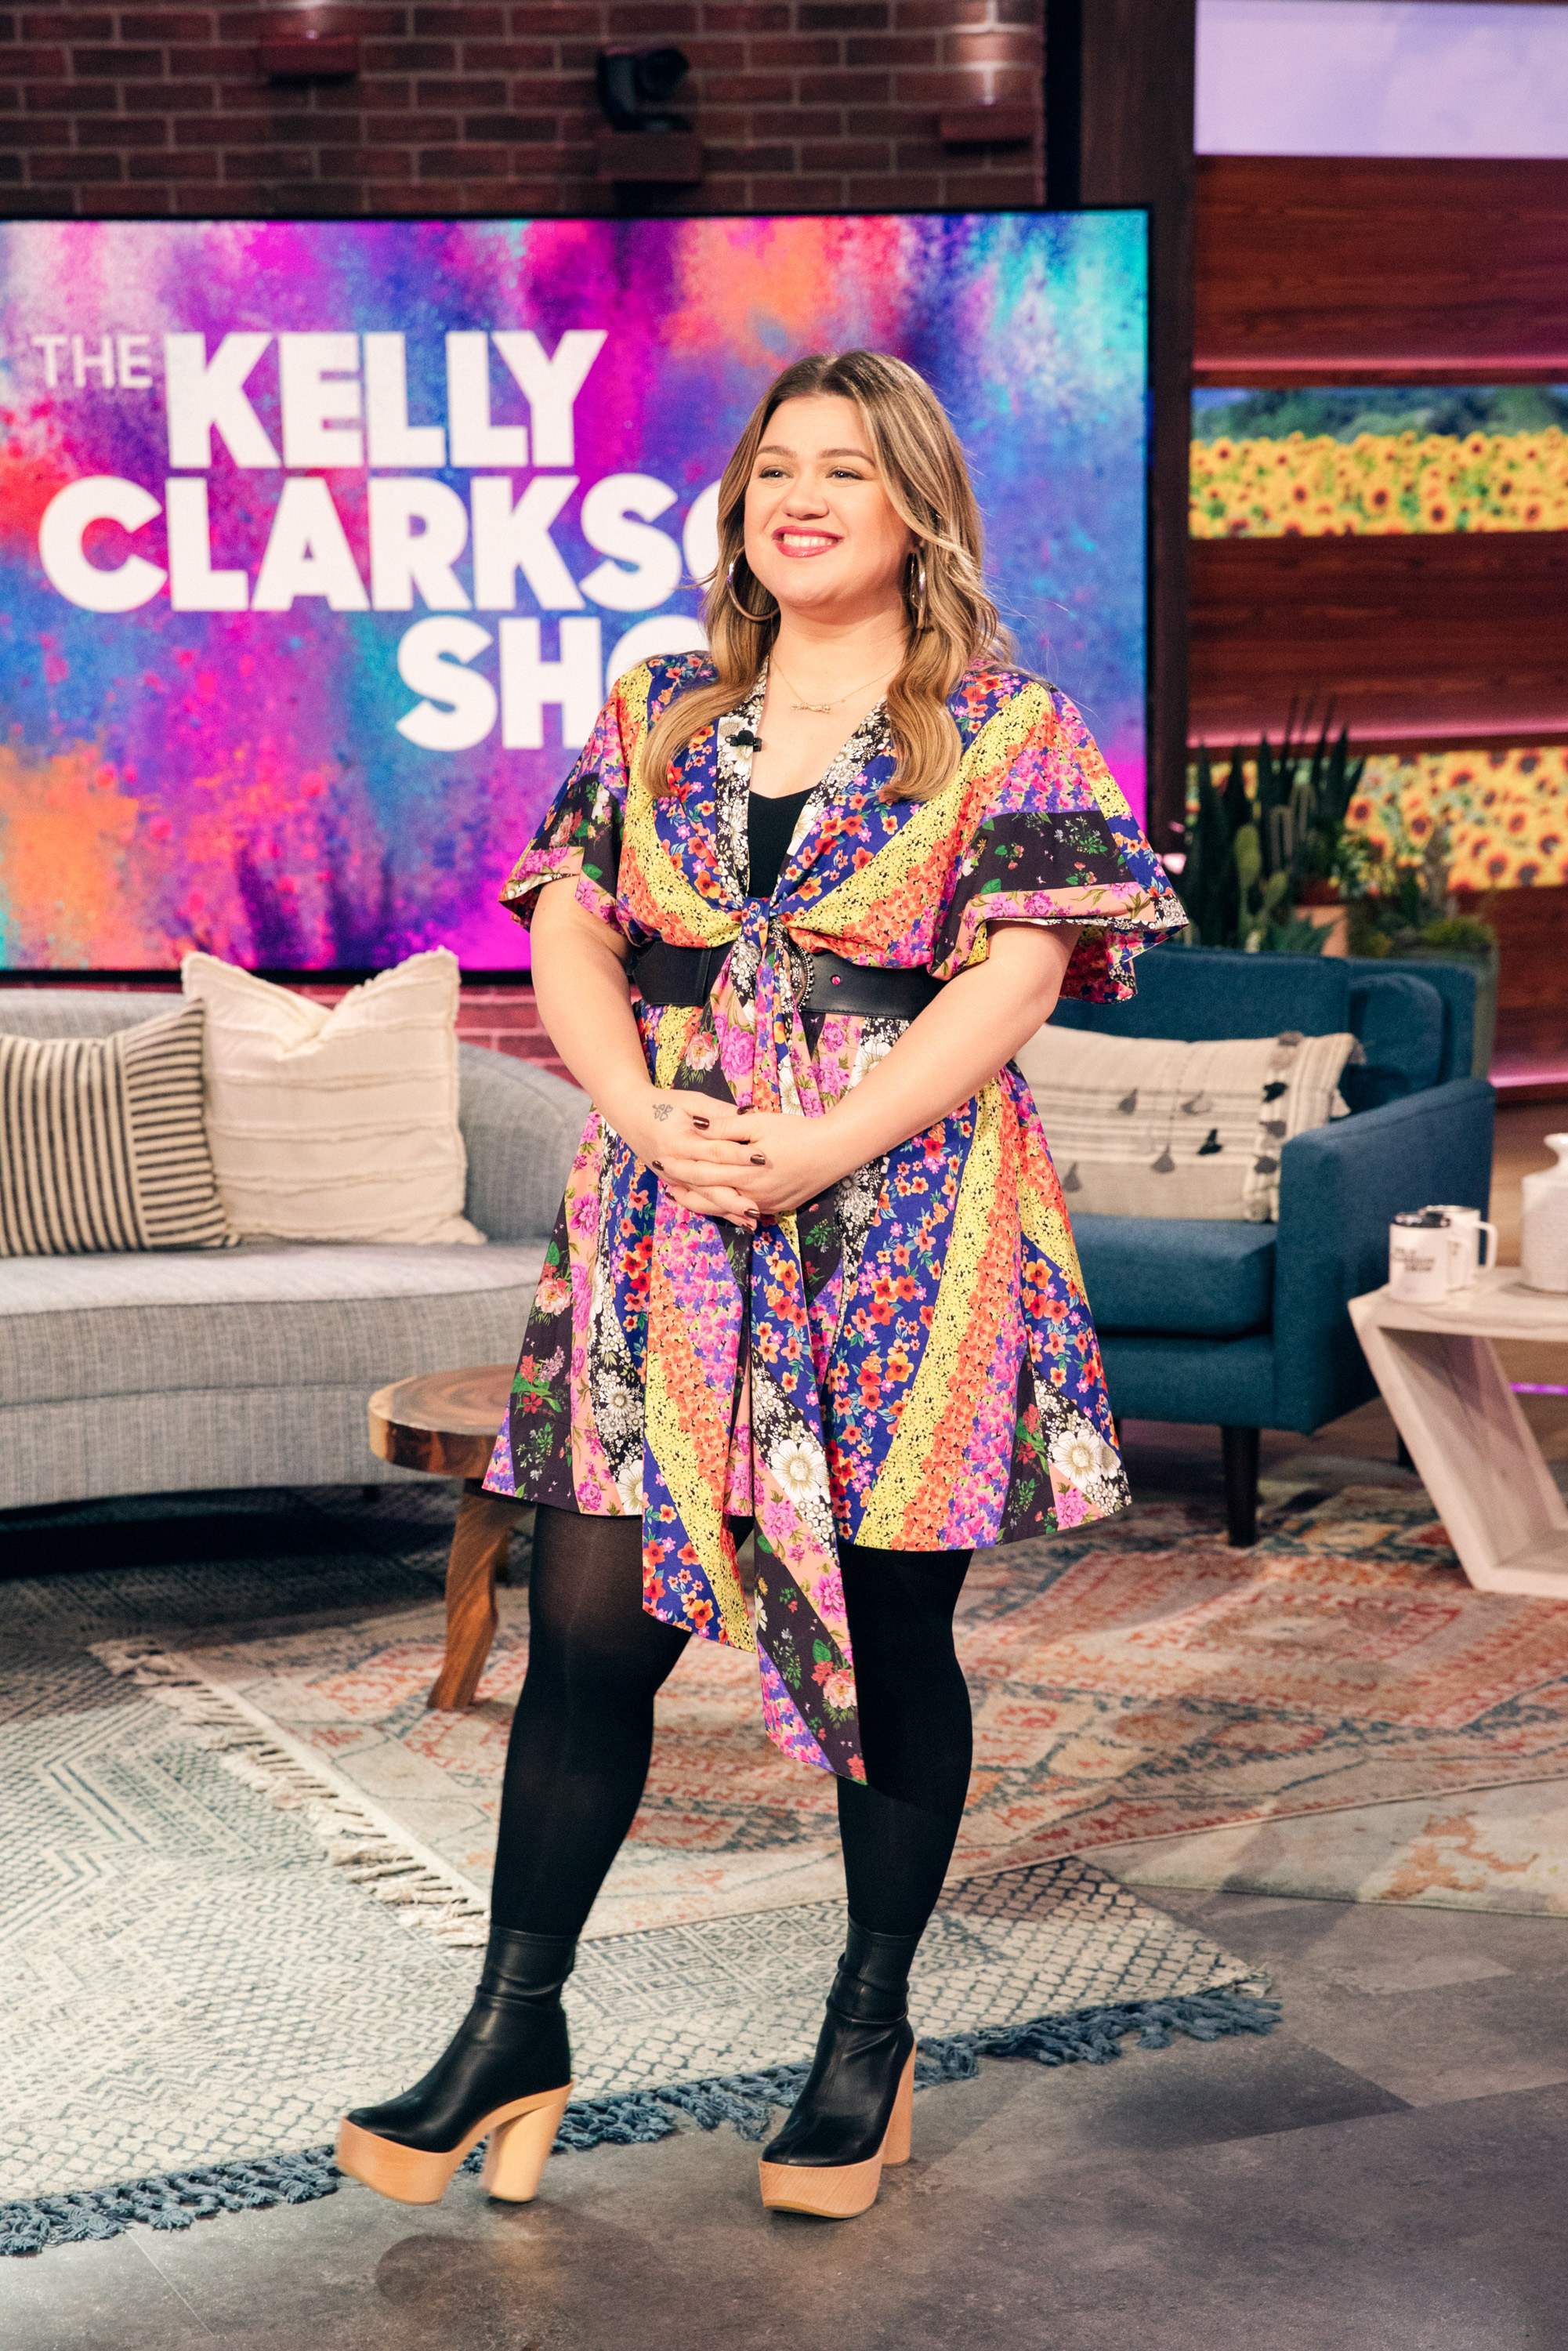 Kelly smiles while standing on the set of her daytime talkshow The Kelly Clarkson Show